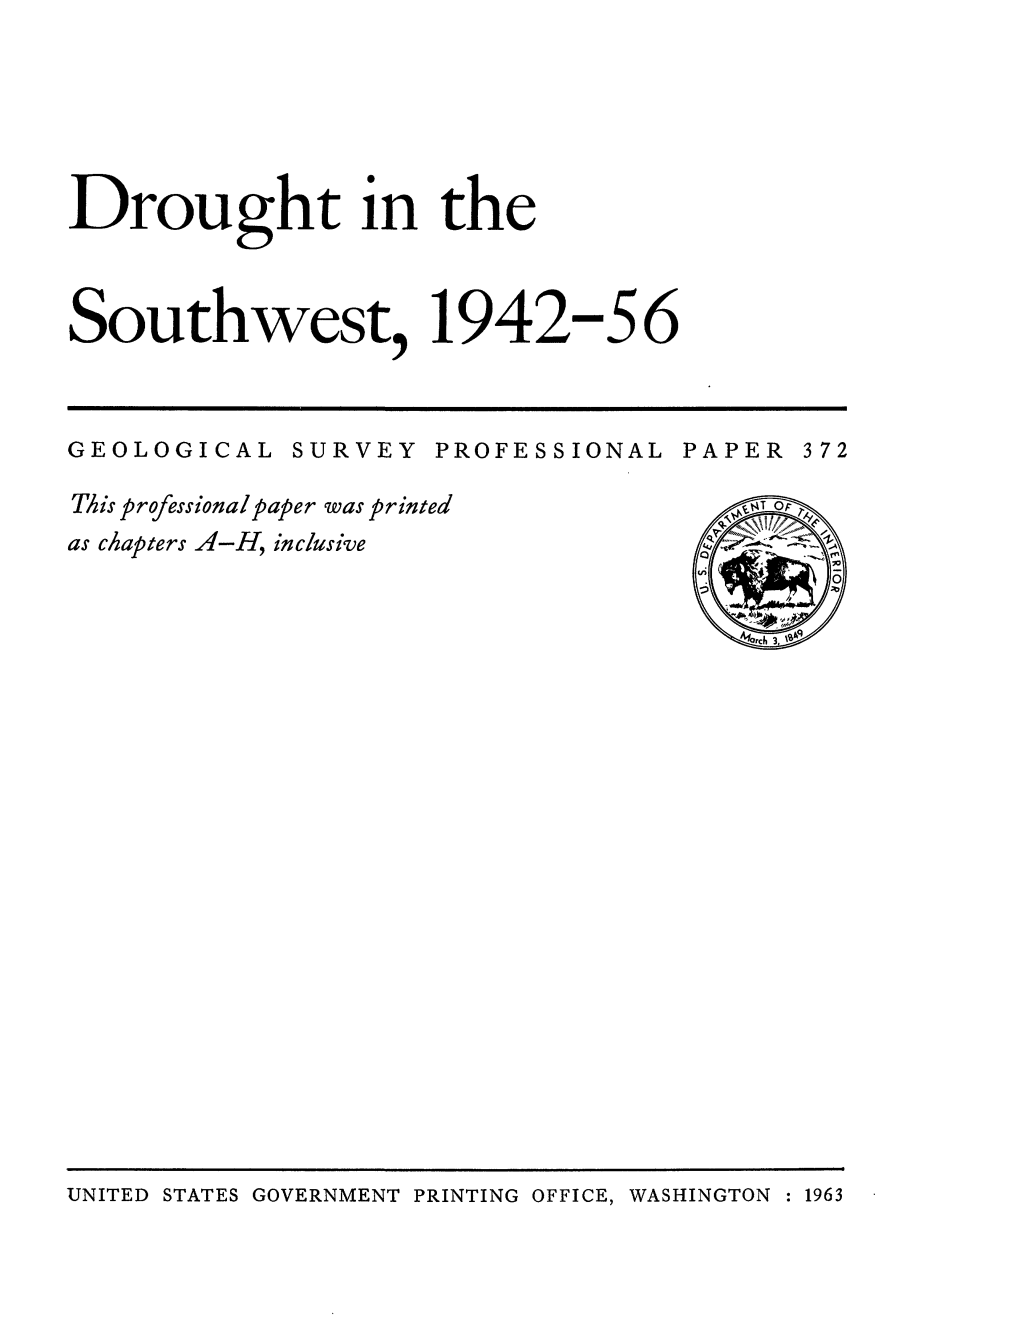 Drought in the Southwest, 1942-56